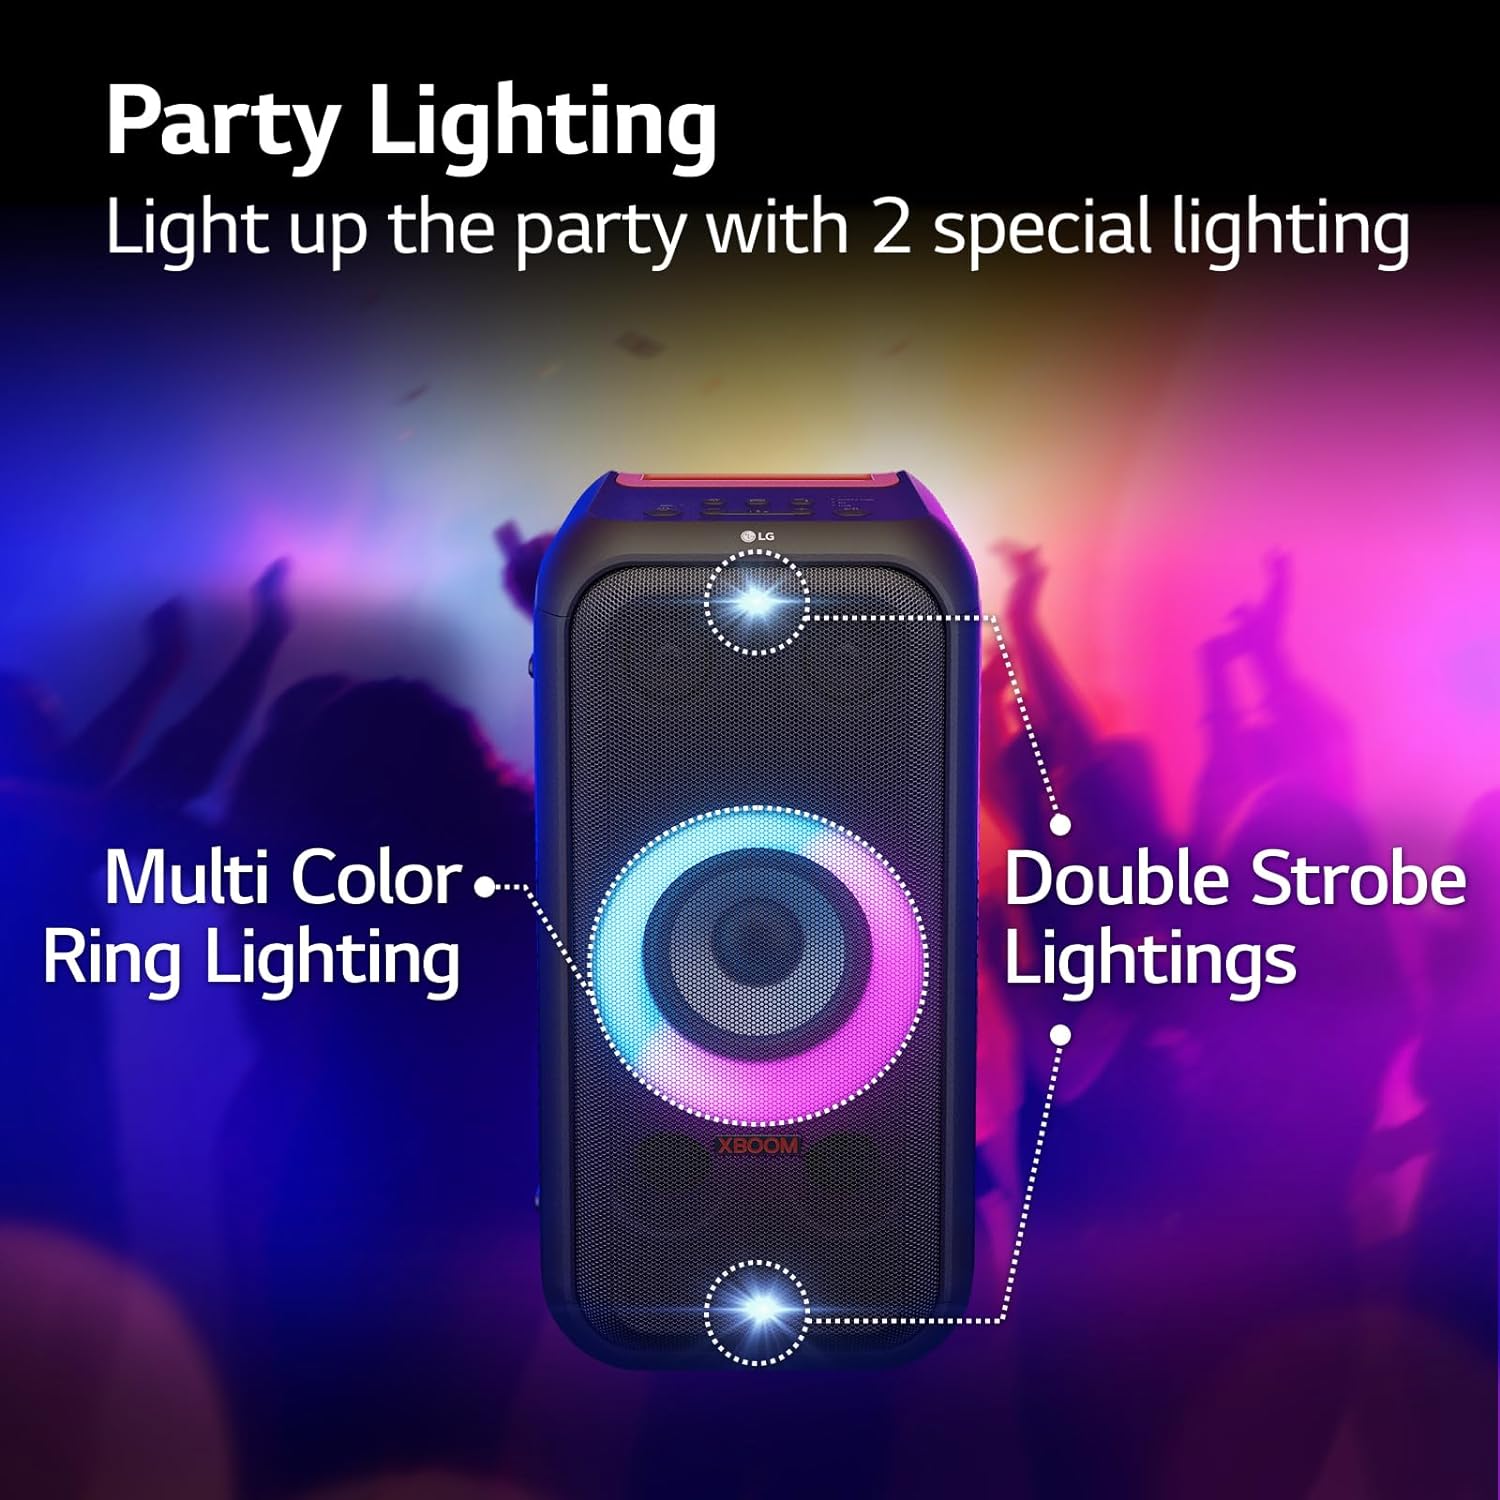 LG XBOOM XL5S 200W 2.1ch Multi-Color Ring Lighting Audio System up to 12HR Battery - Mahajan Electronics Online